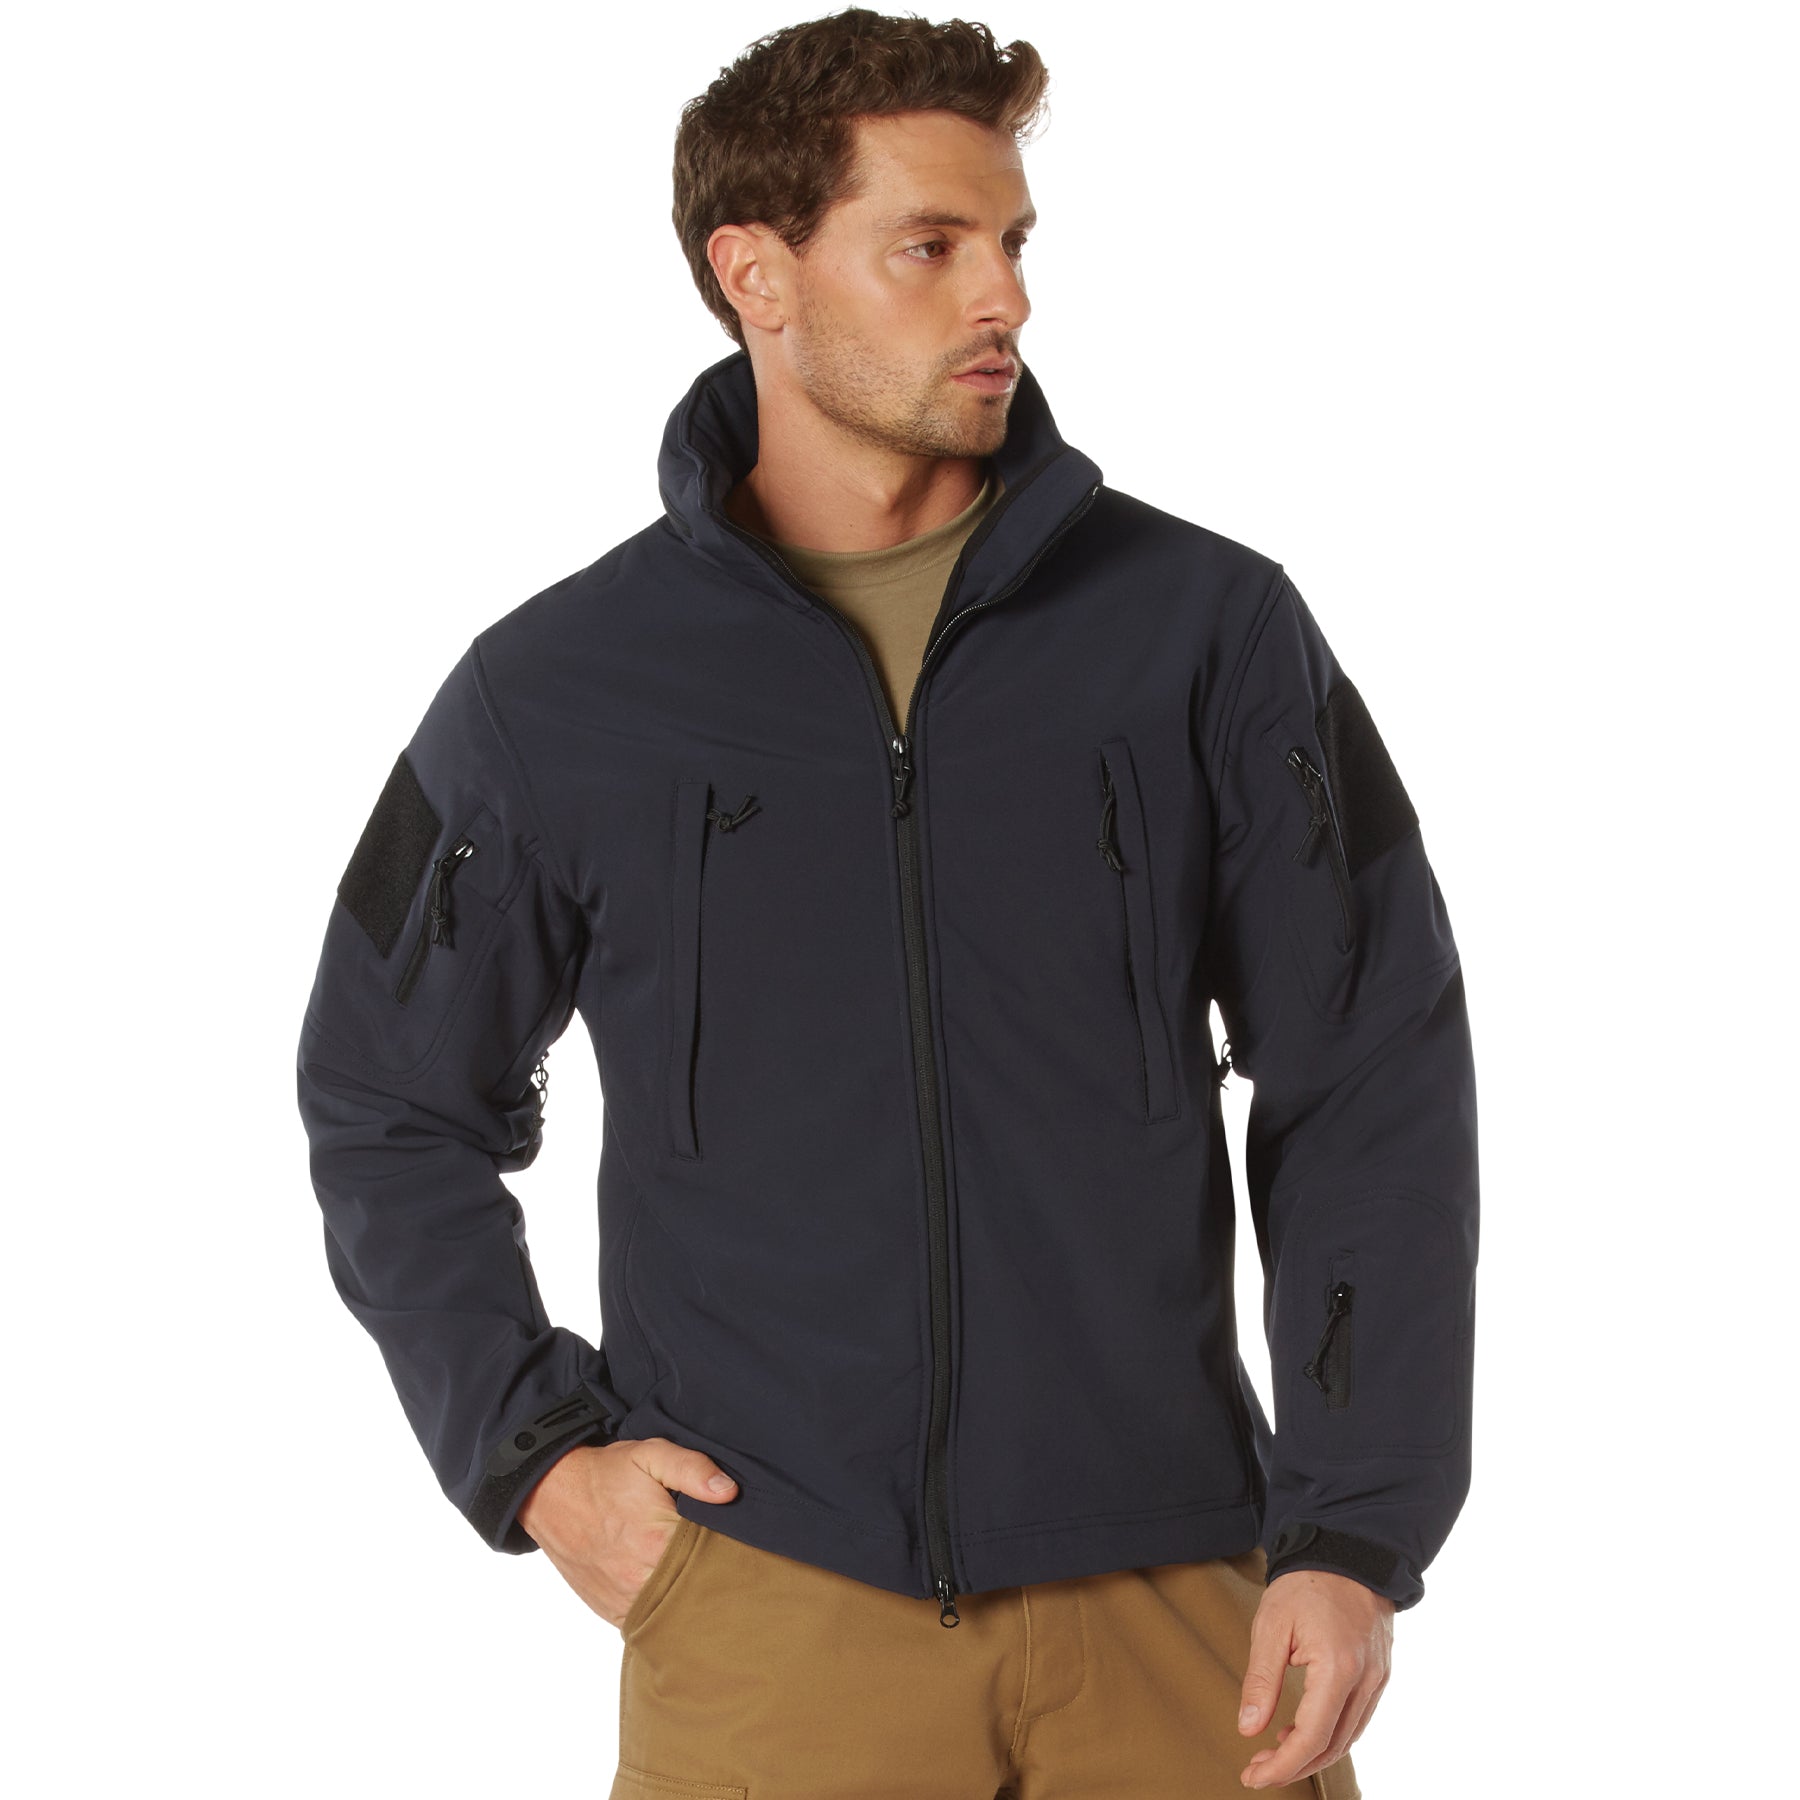 Poly Spec Ops Tactical Soft Shell Jackets Midnight Navy Blue